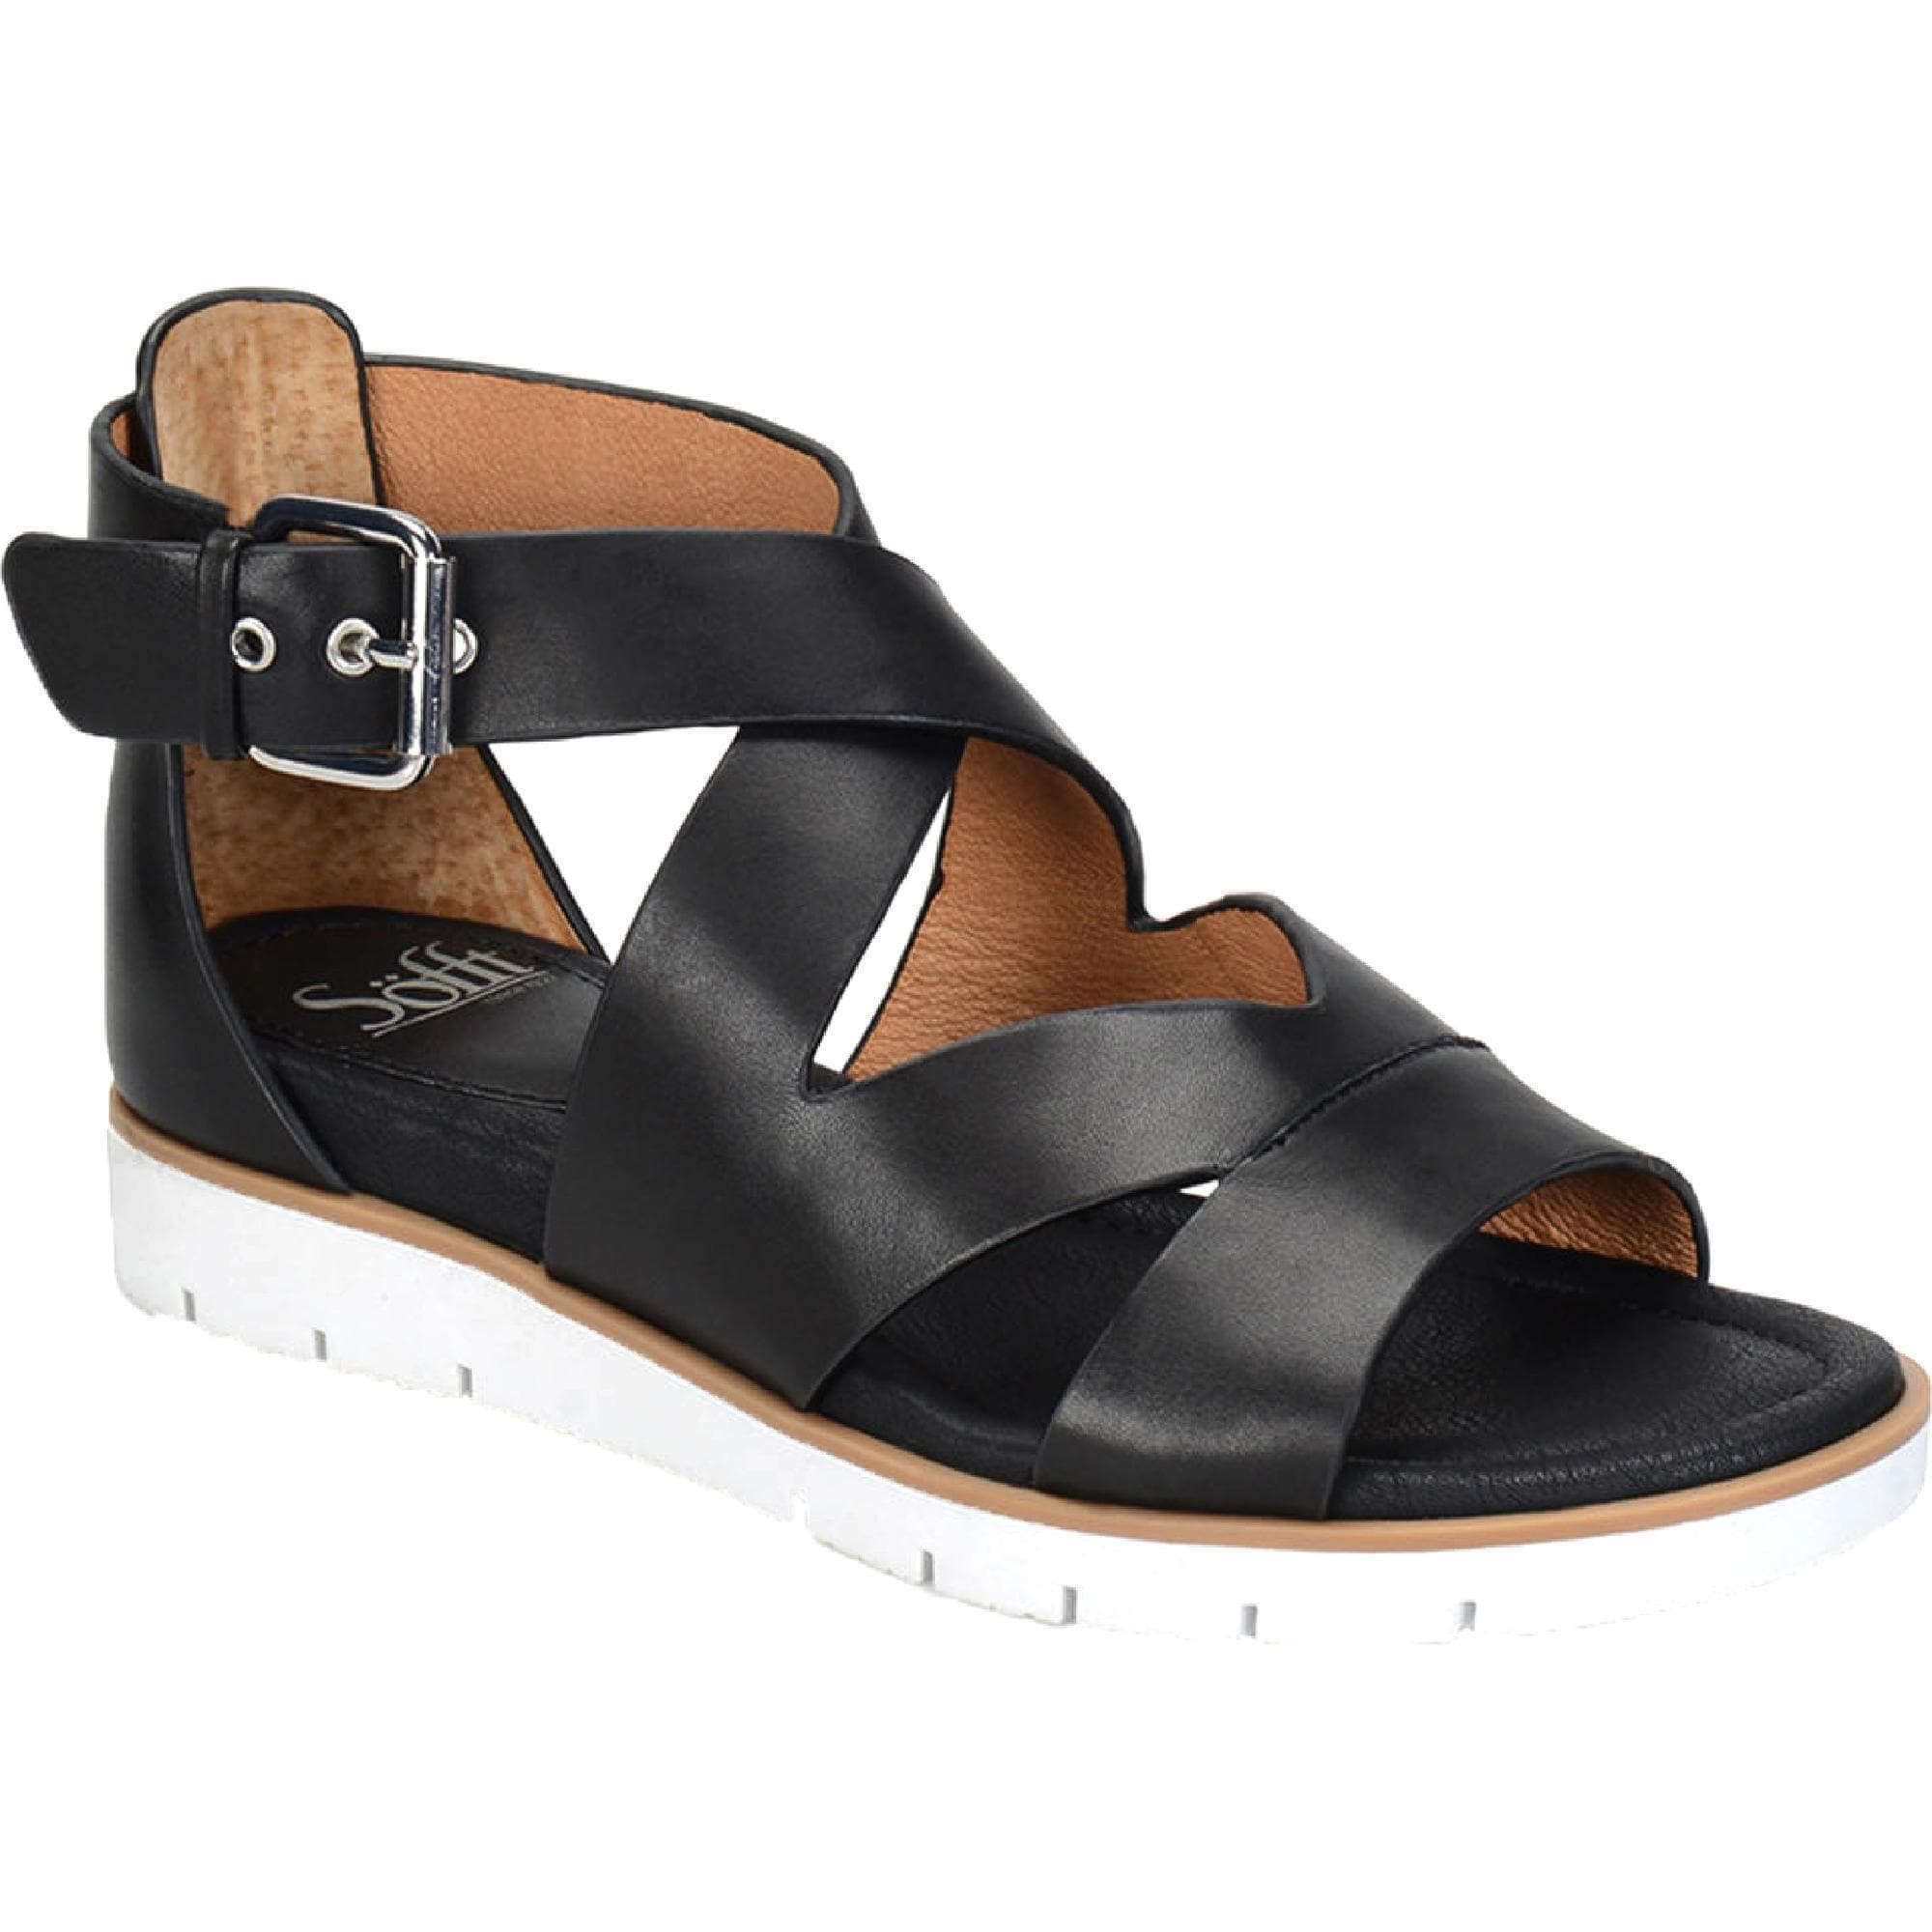 sofft strappy sandals